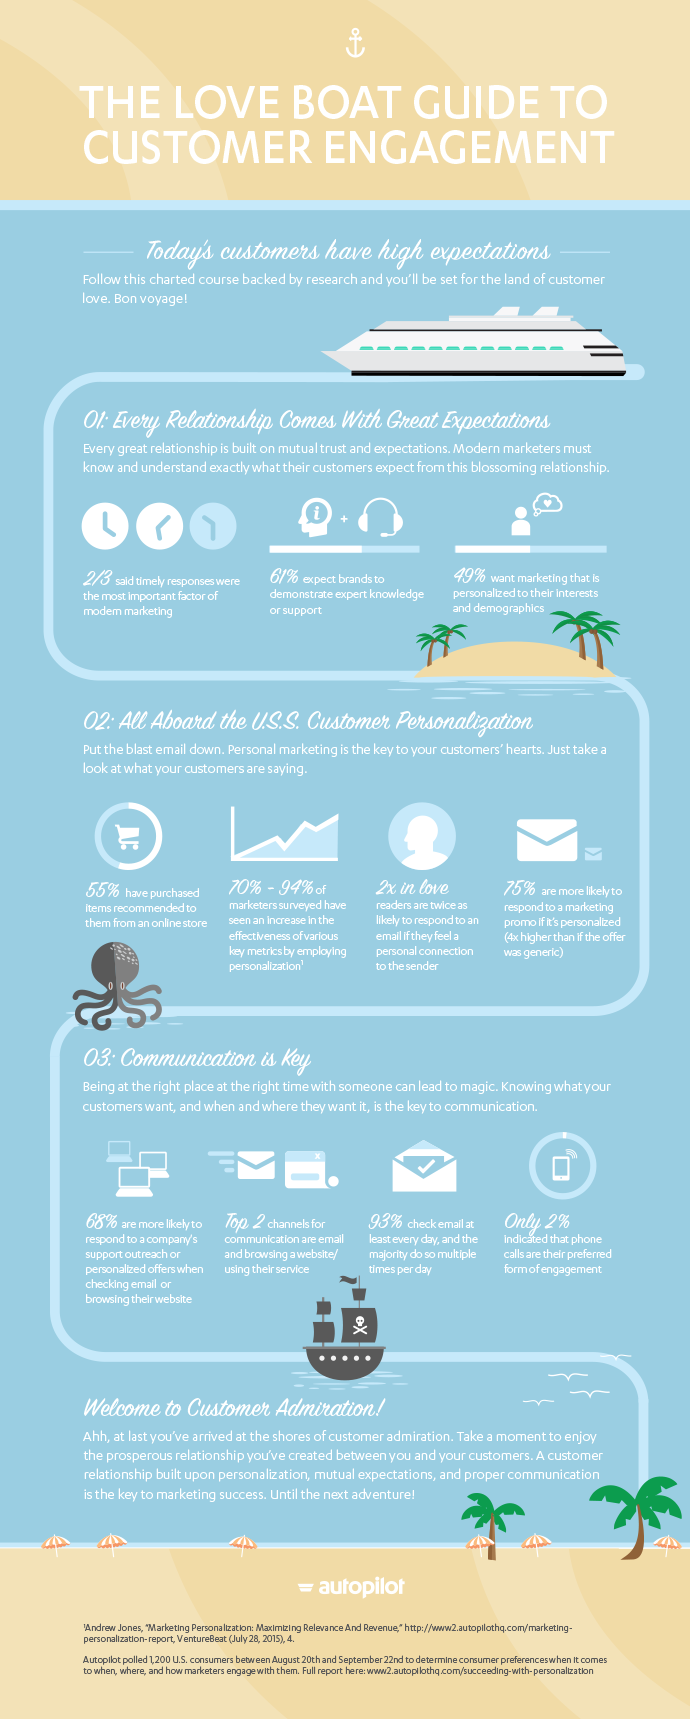 The Loveboat Guide to Customer Engagement Infographic